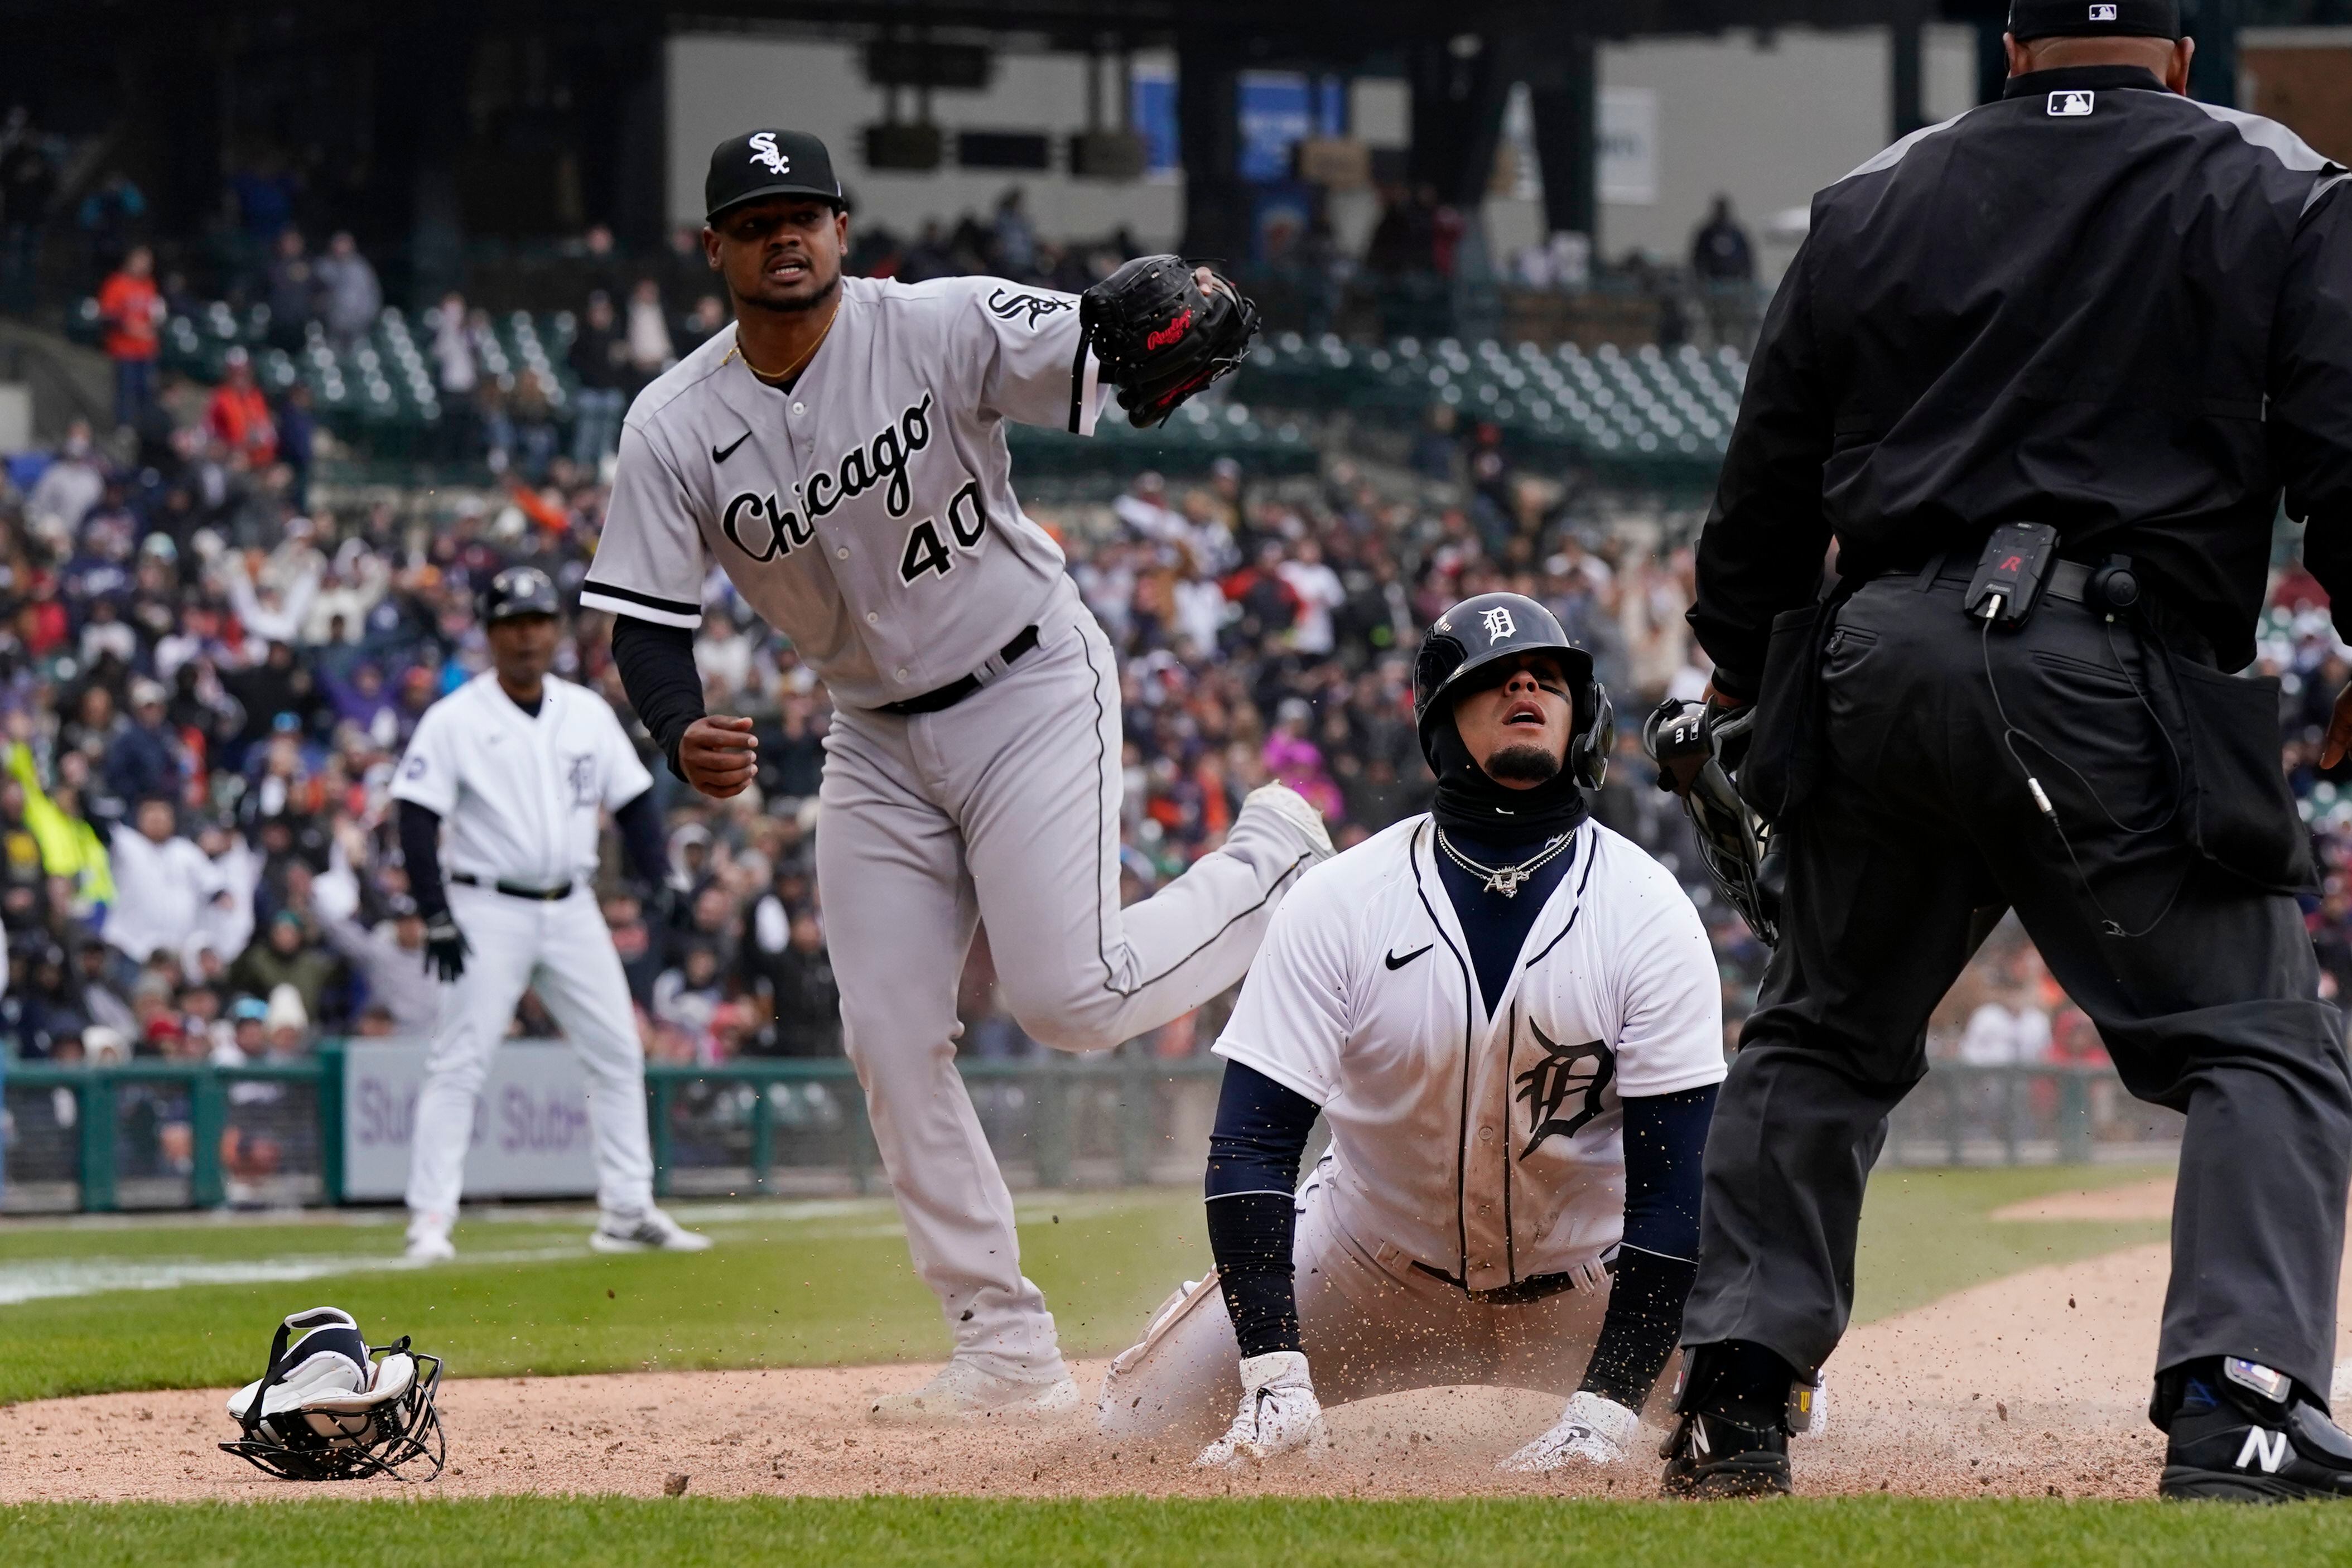 Cease remains unbeaten against Tigers as White Sox romp